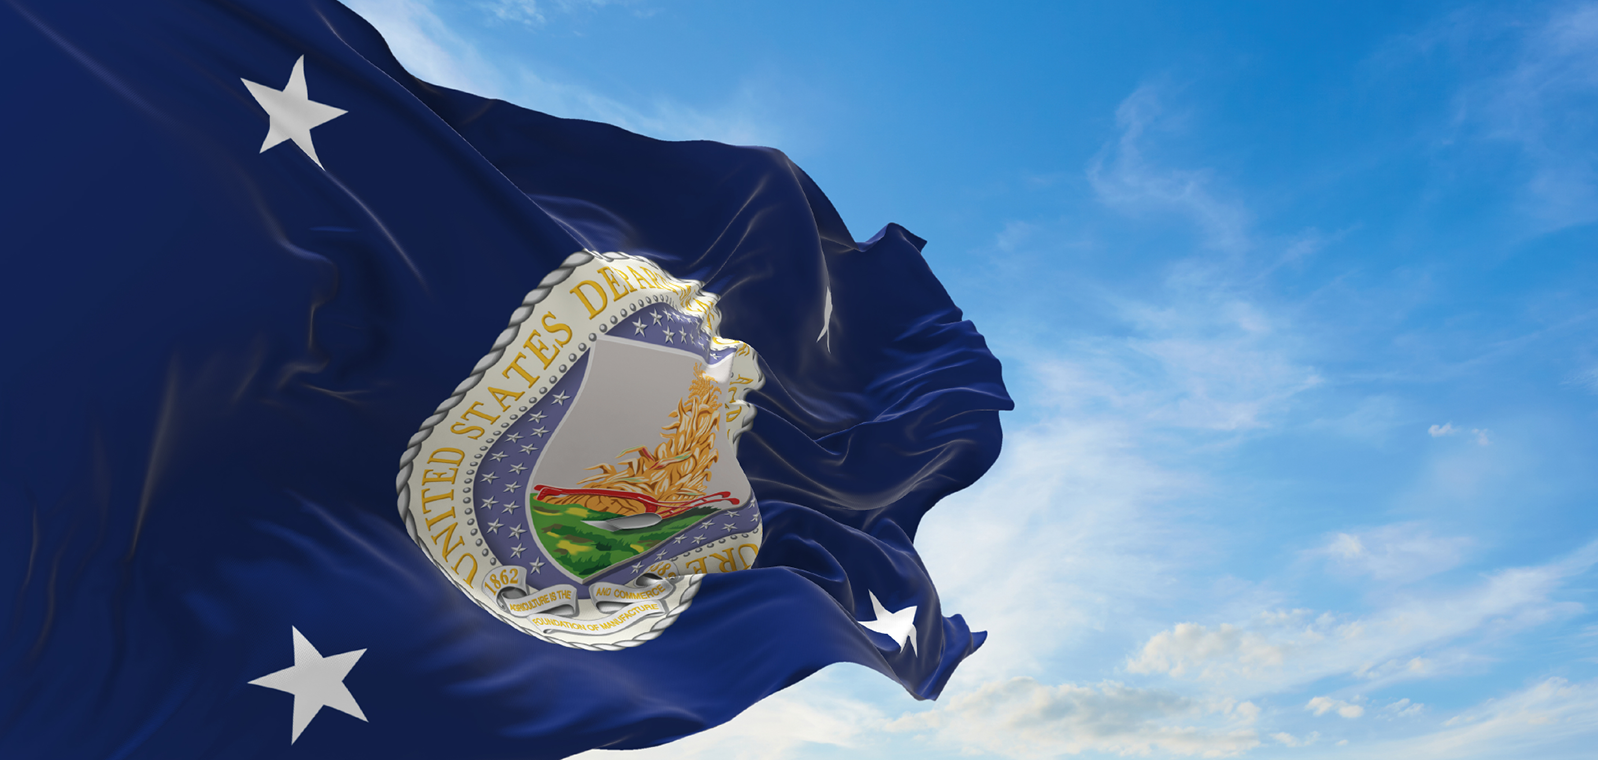 United States Department of Agriculture flag